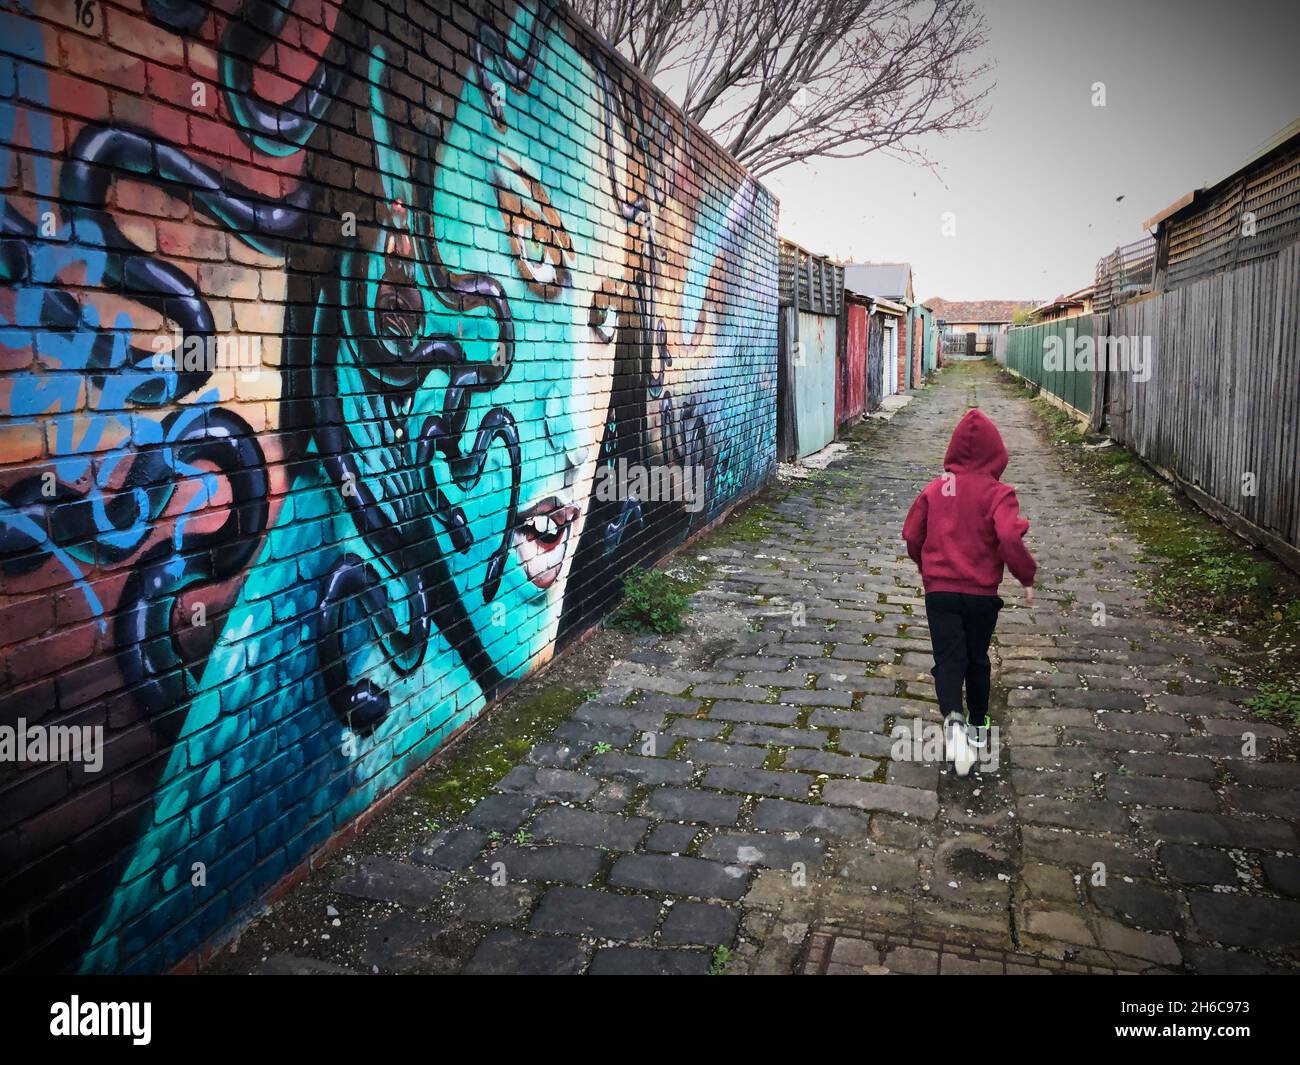 A child in a red hooded jacket runs down a graffitied laneway in West Footscray, Melbourne Australia, August 2021. Stock Photo